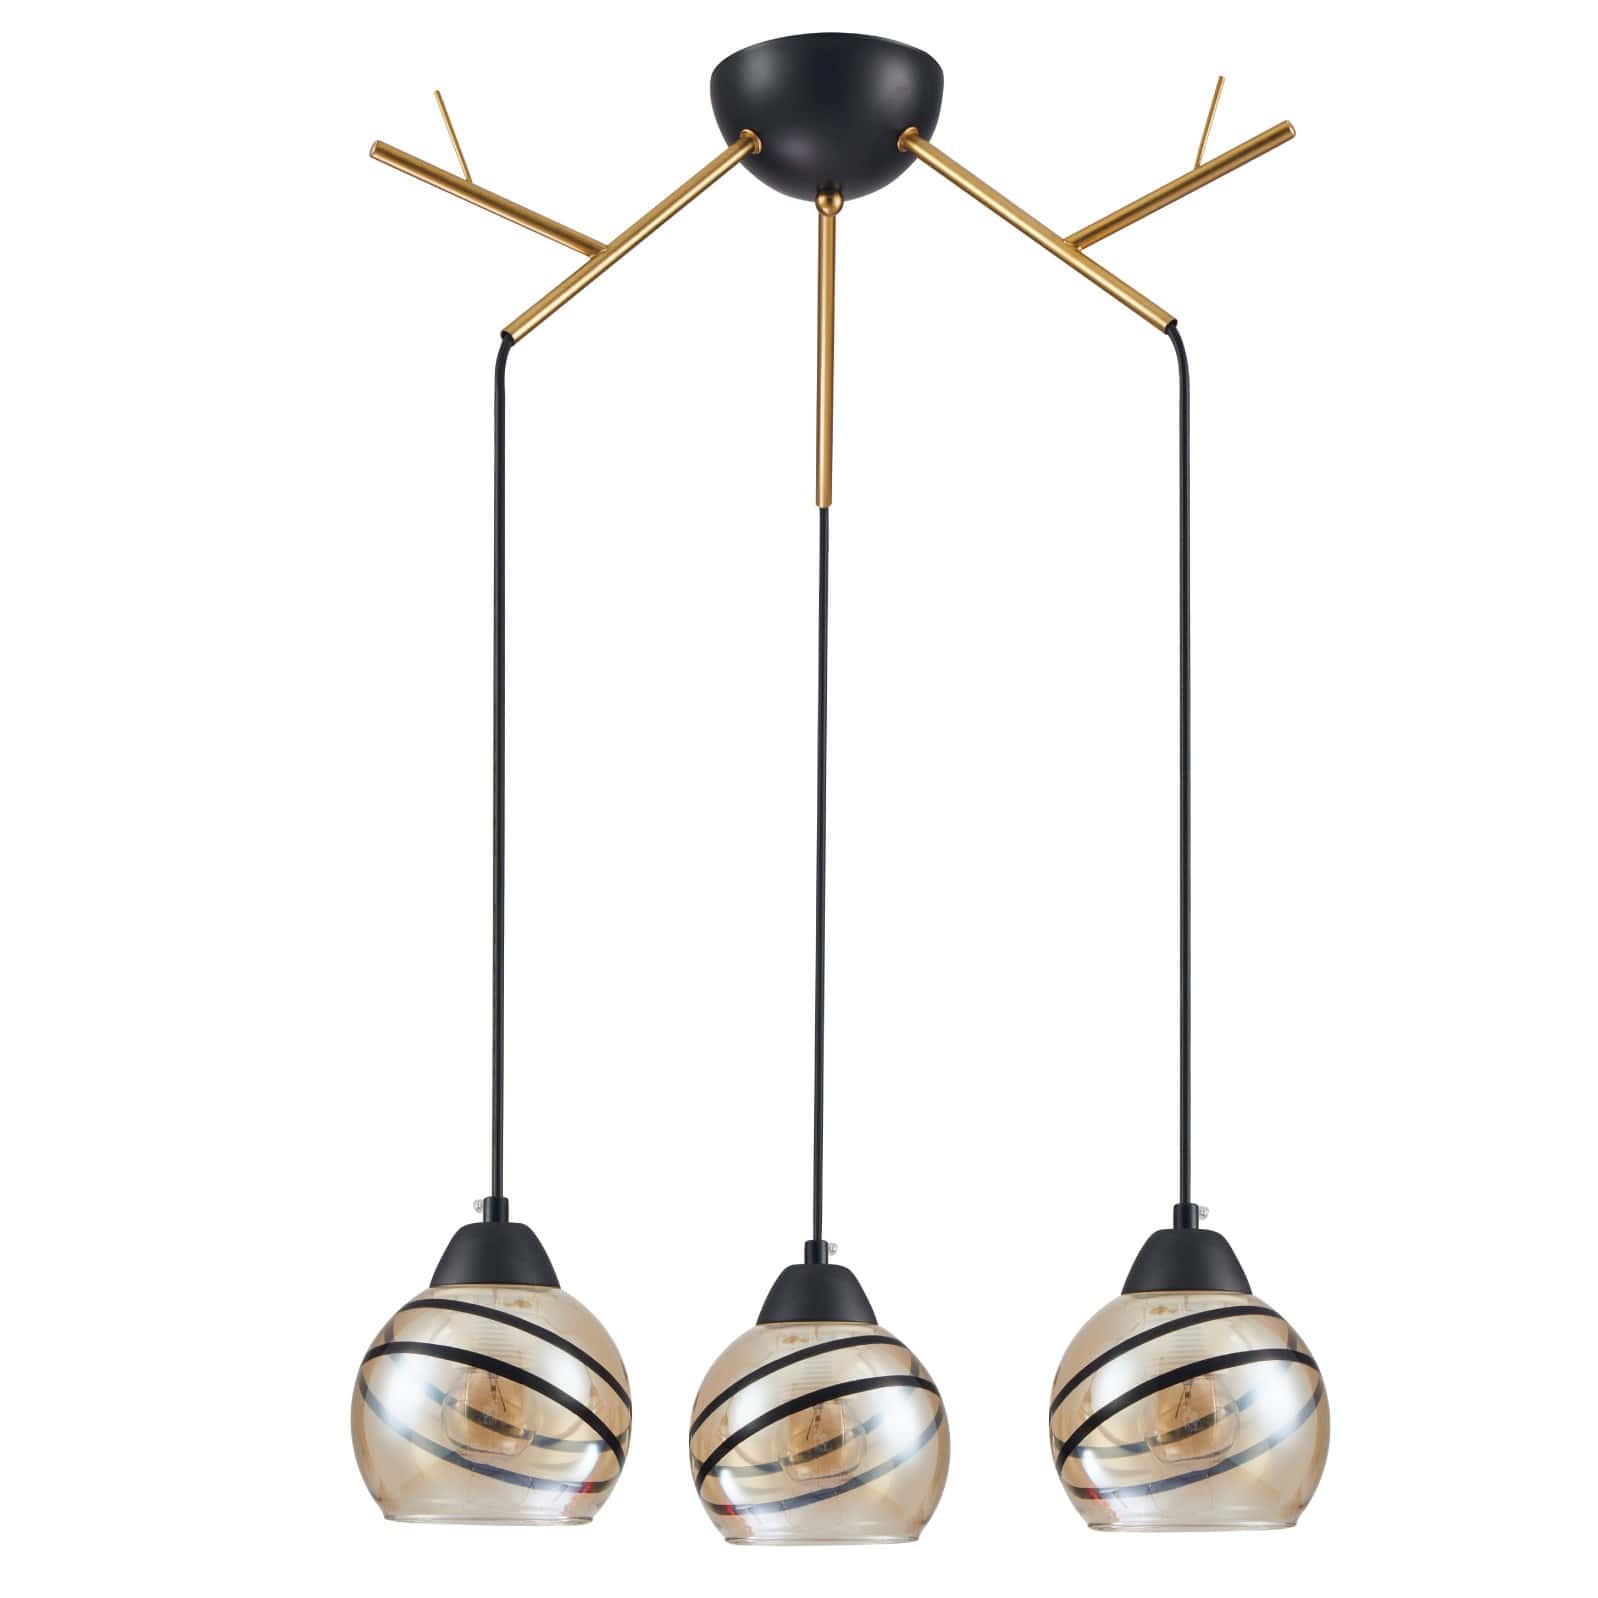 Main image of Amber Dome Glass Gold Twig Modern Ceiling Light | TEKLED 159-17594